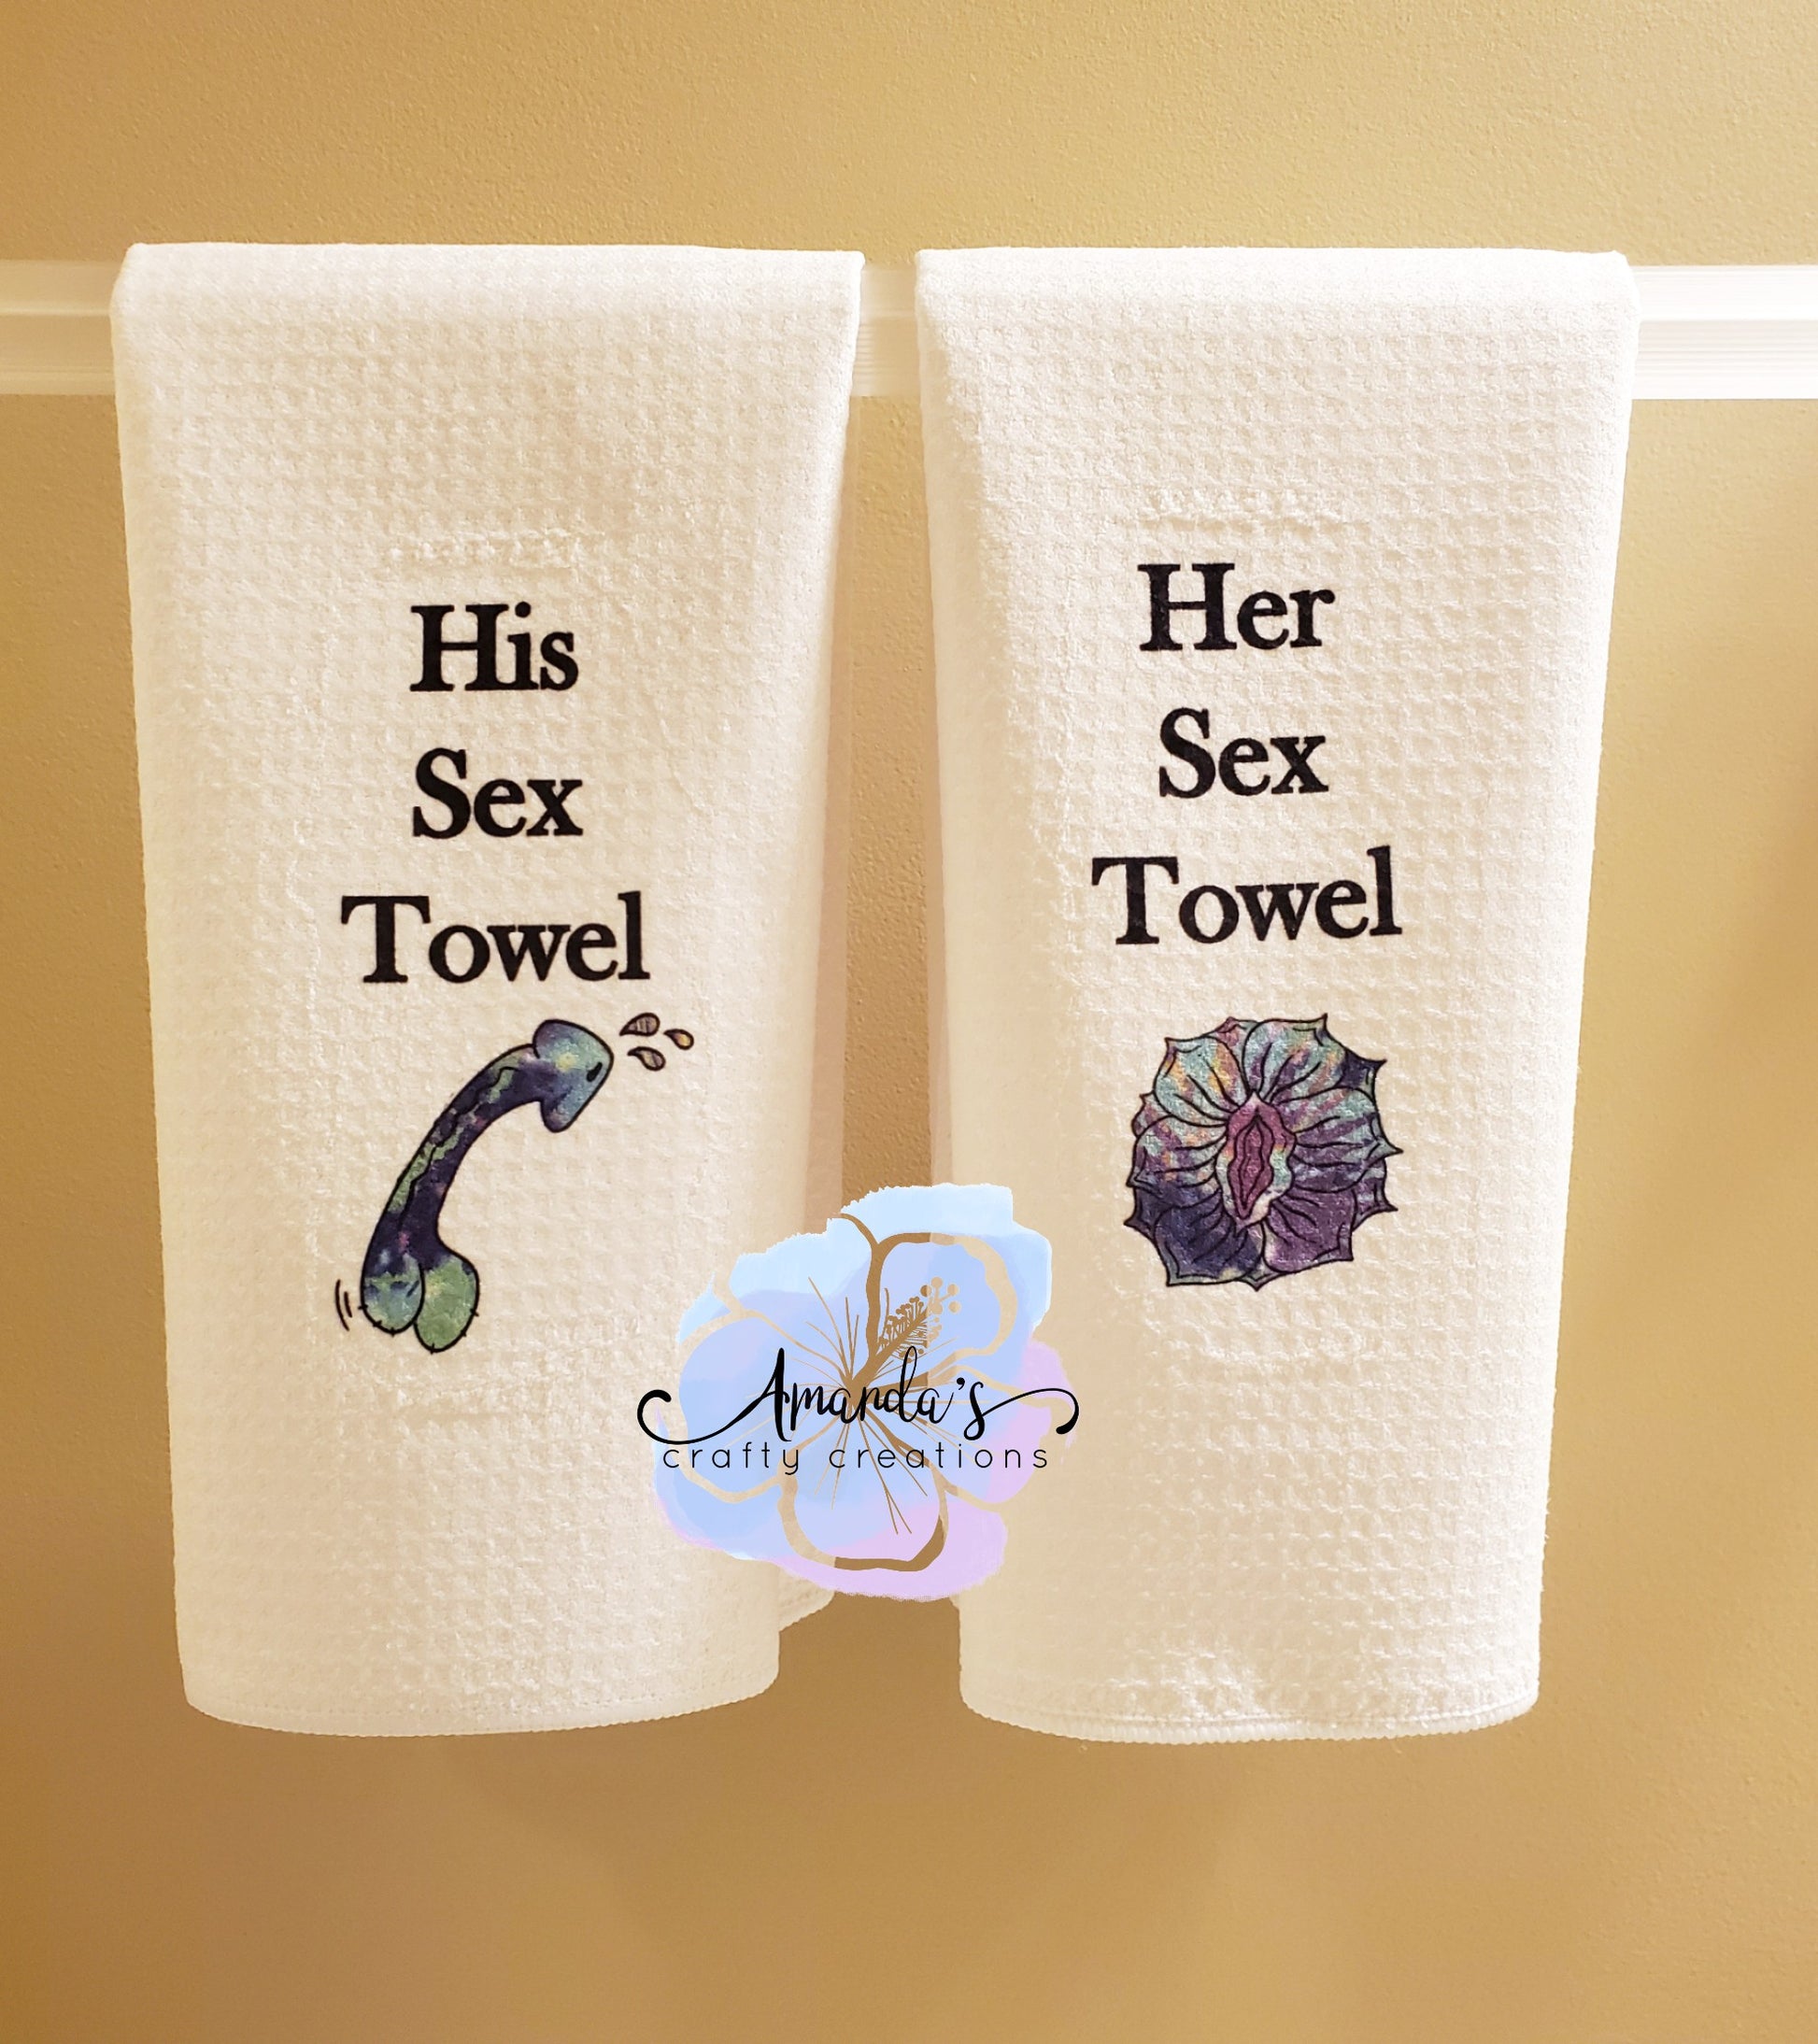 His & Her Sex Towels Funny Hand Towel Set, Funny Mature wedding bachelor  bachelorette gift idea, funny couple towels